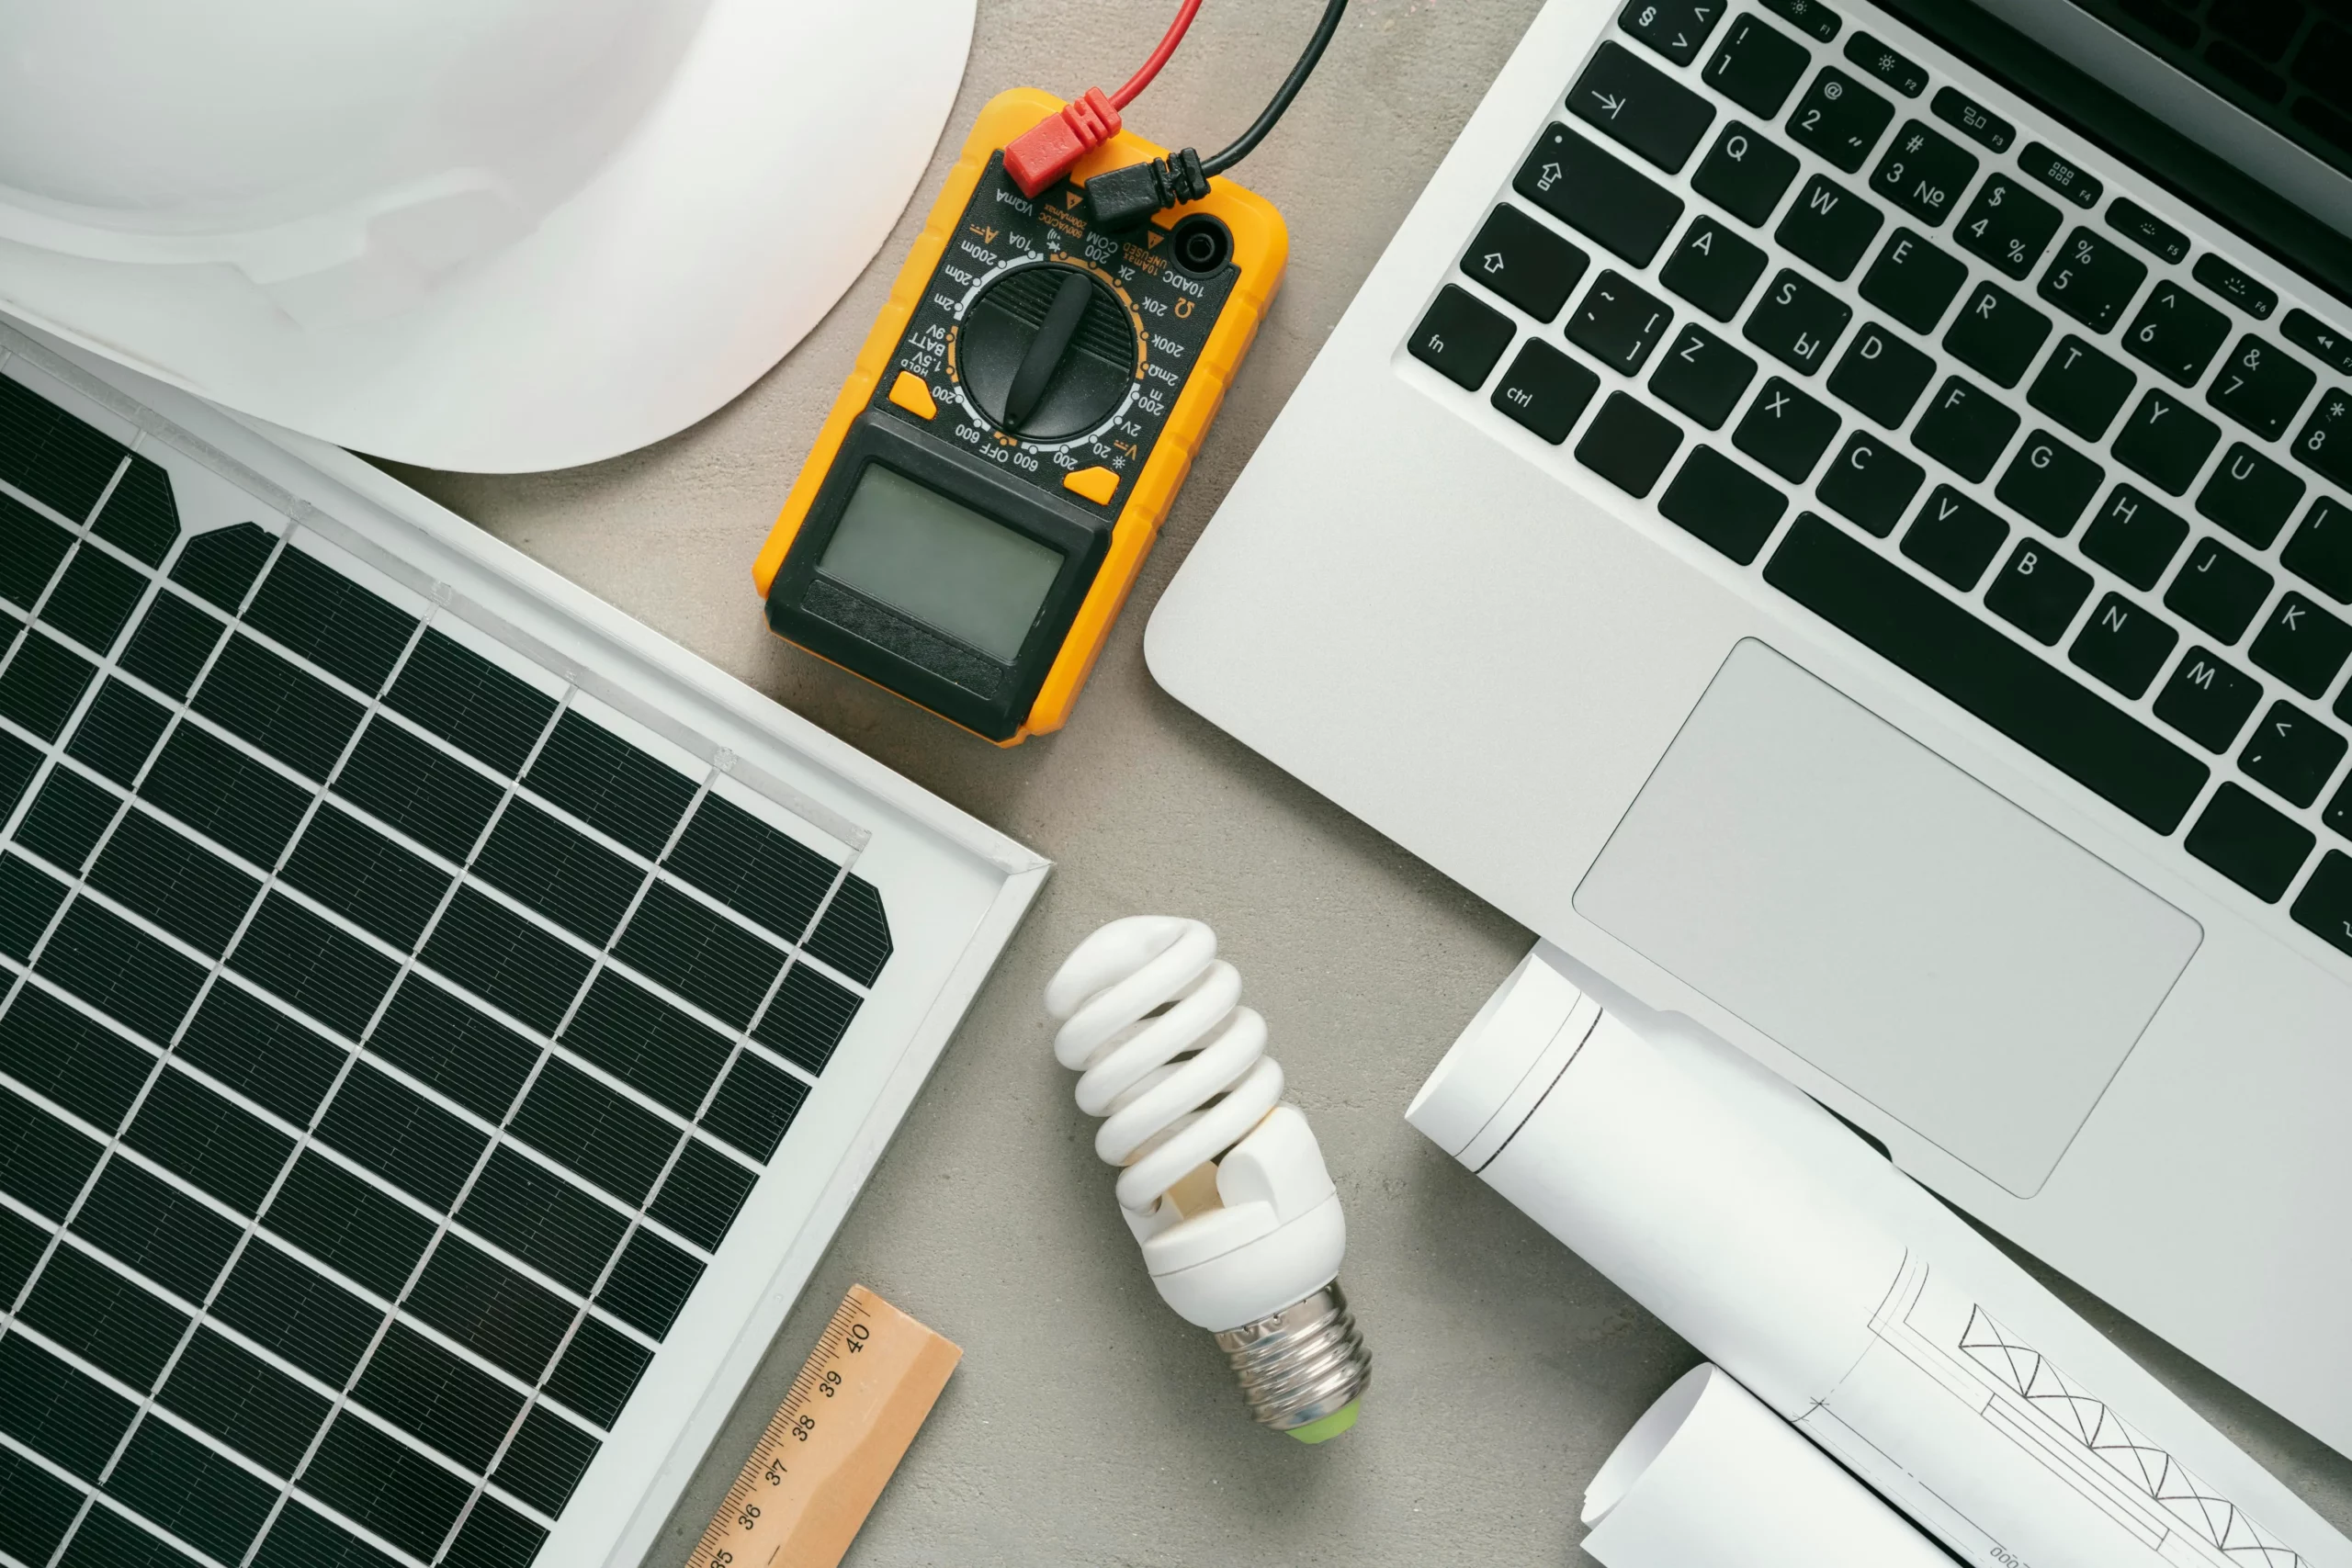 Picture with objects related to electrical engineering: computer, light bulb, ammeter, solar panel